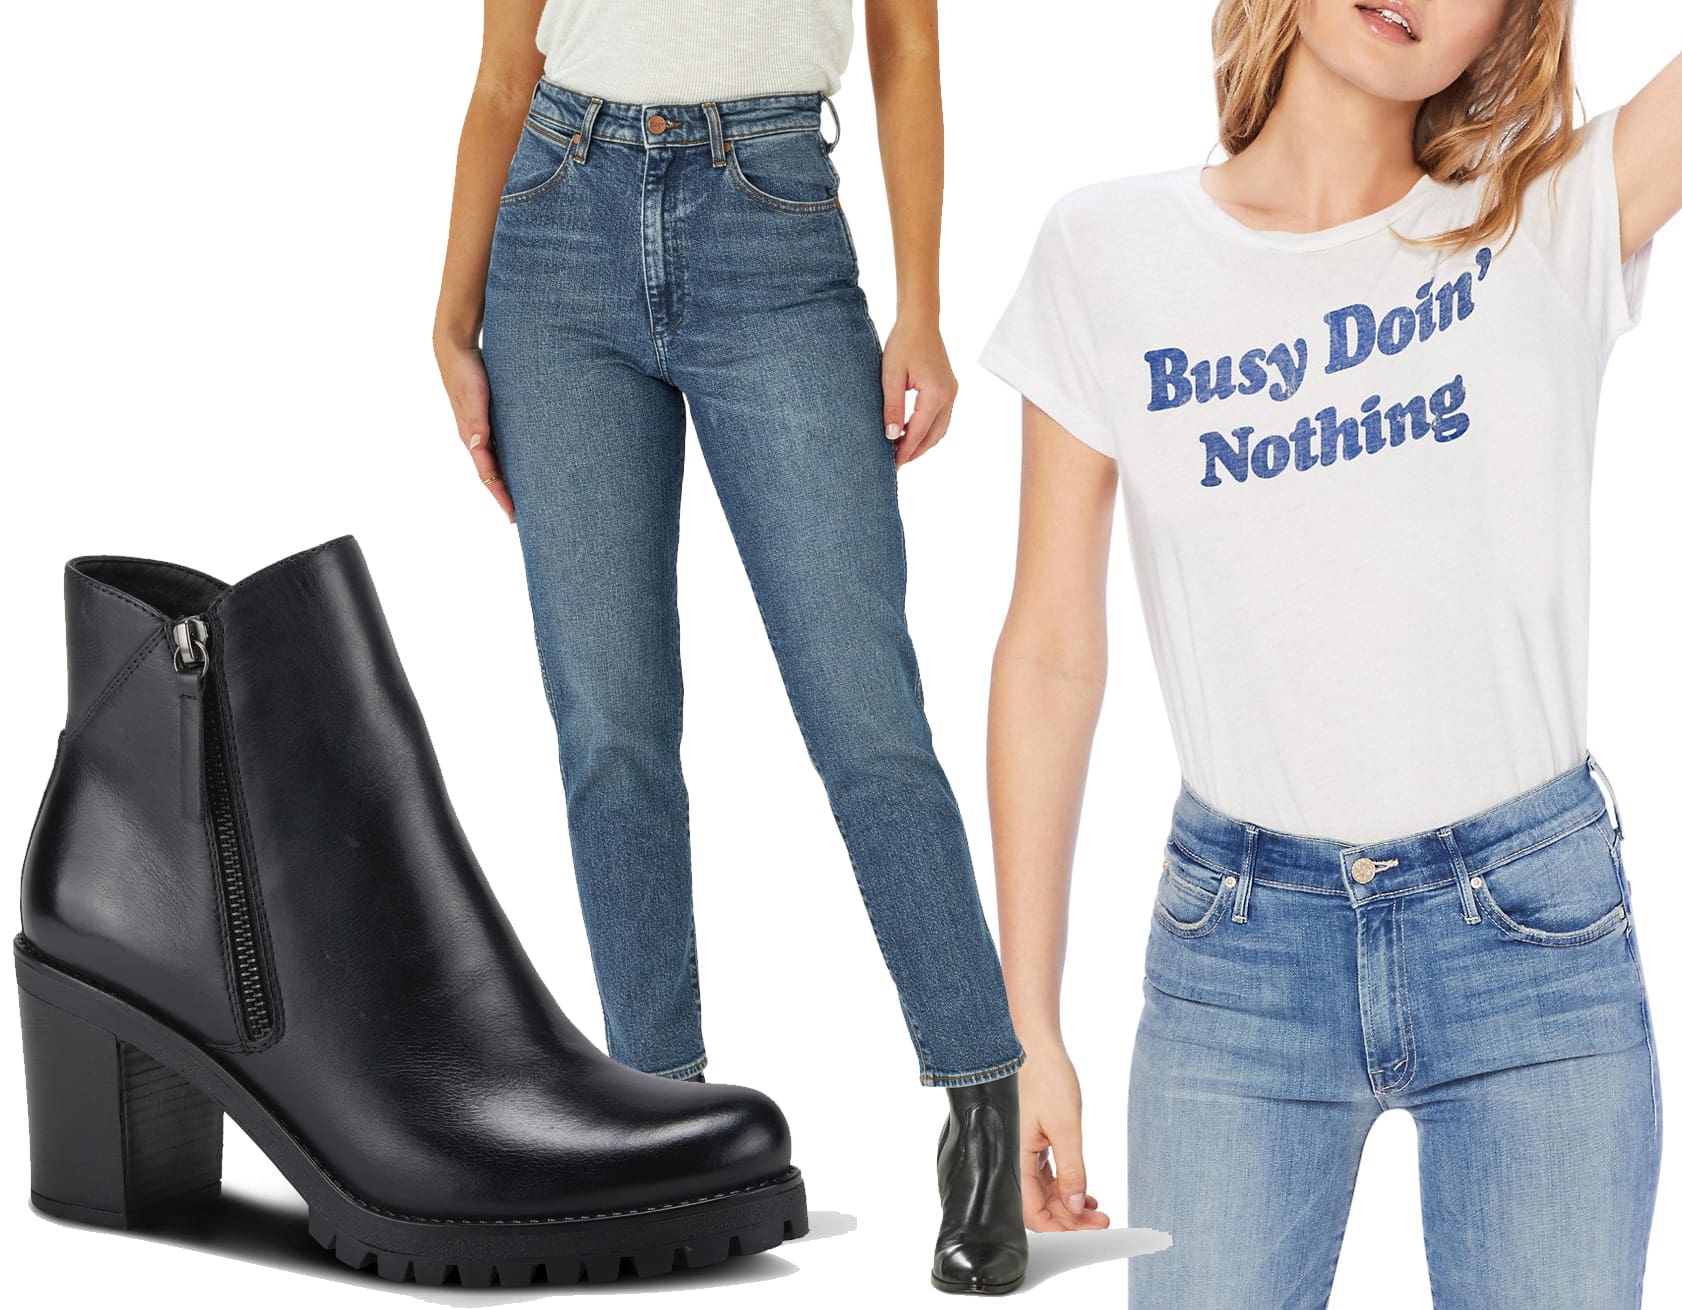 Spring Step Dealey Bootie, Wrangler Mom Jeans, Mother Busy Doin Nothing Graphic T-shirt